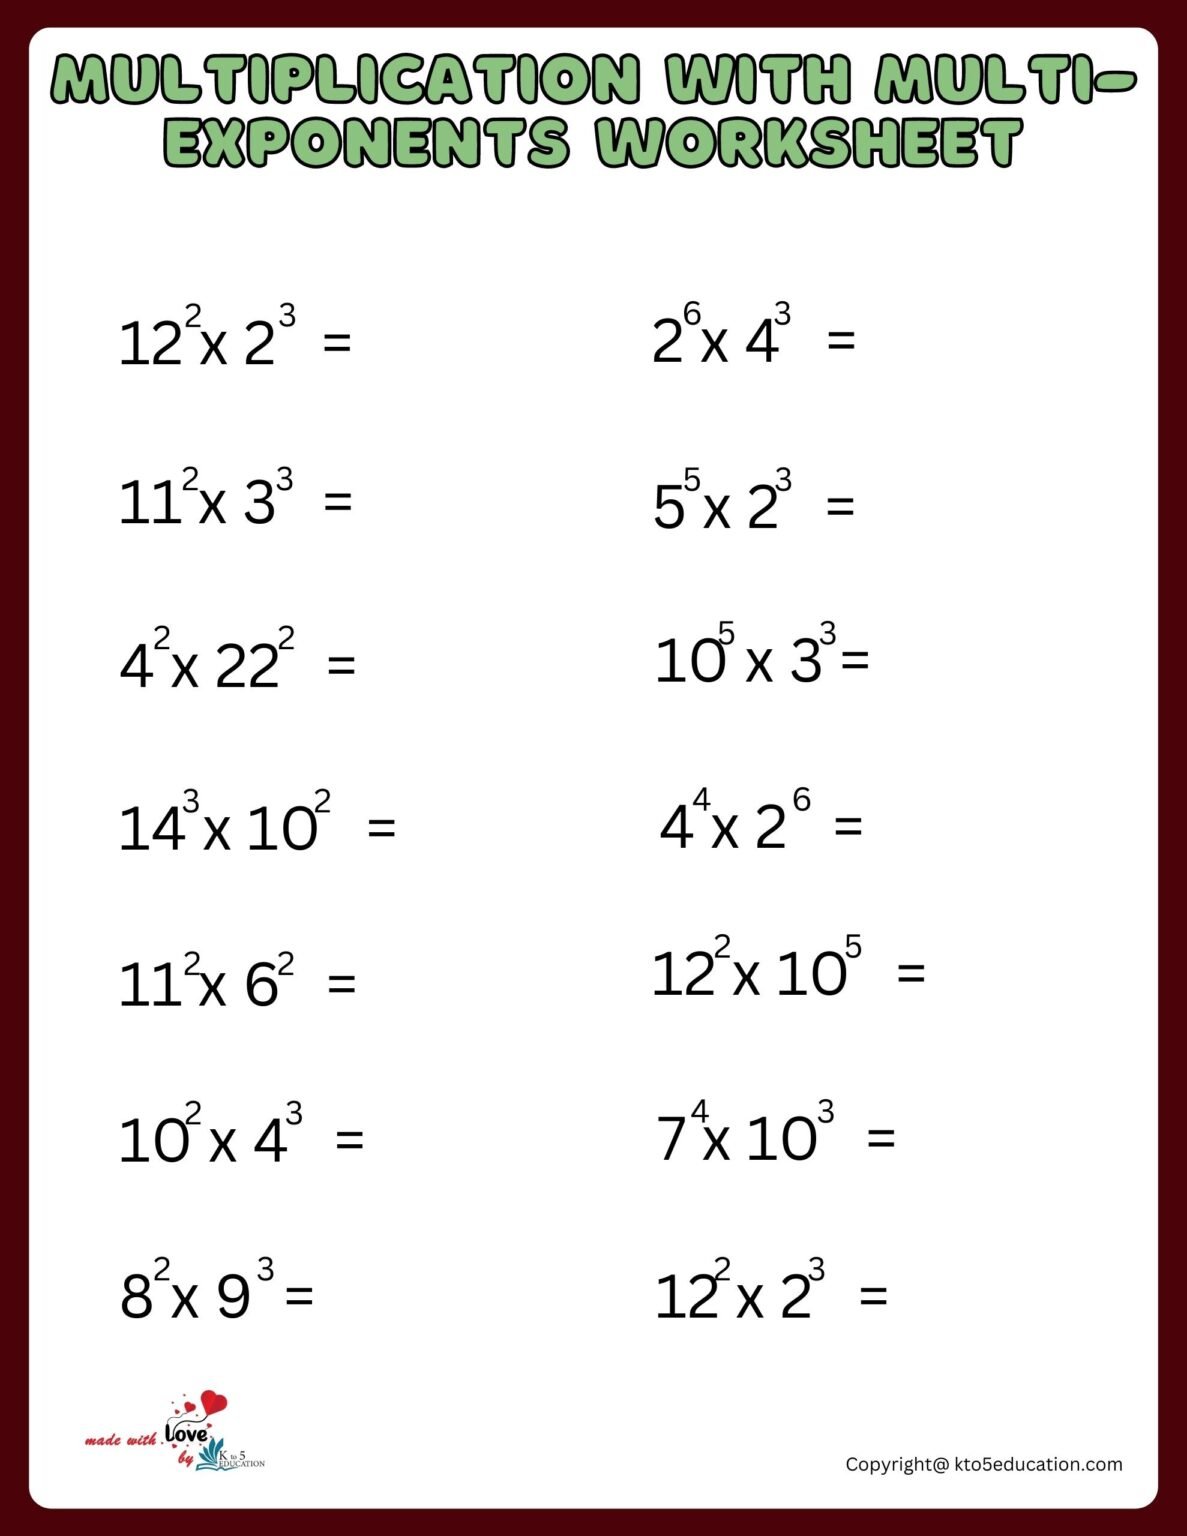 multiplication-worksheet-with-multi-exponents-for-online